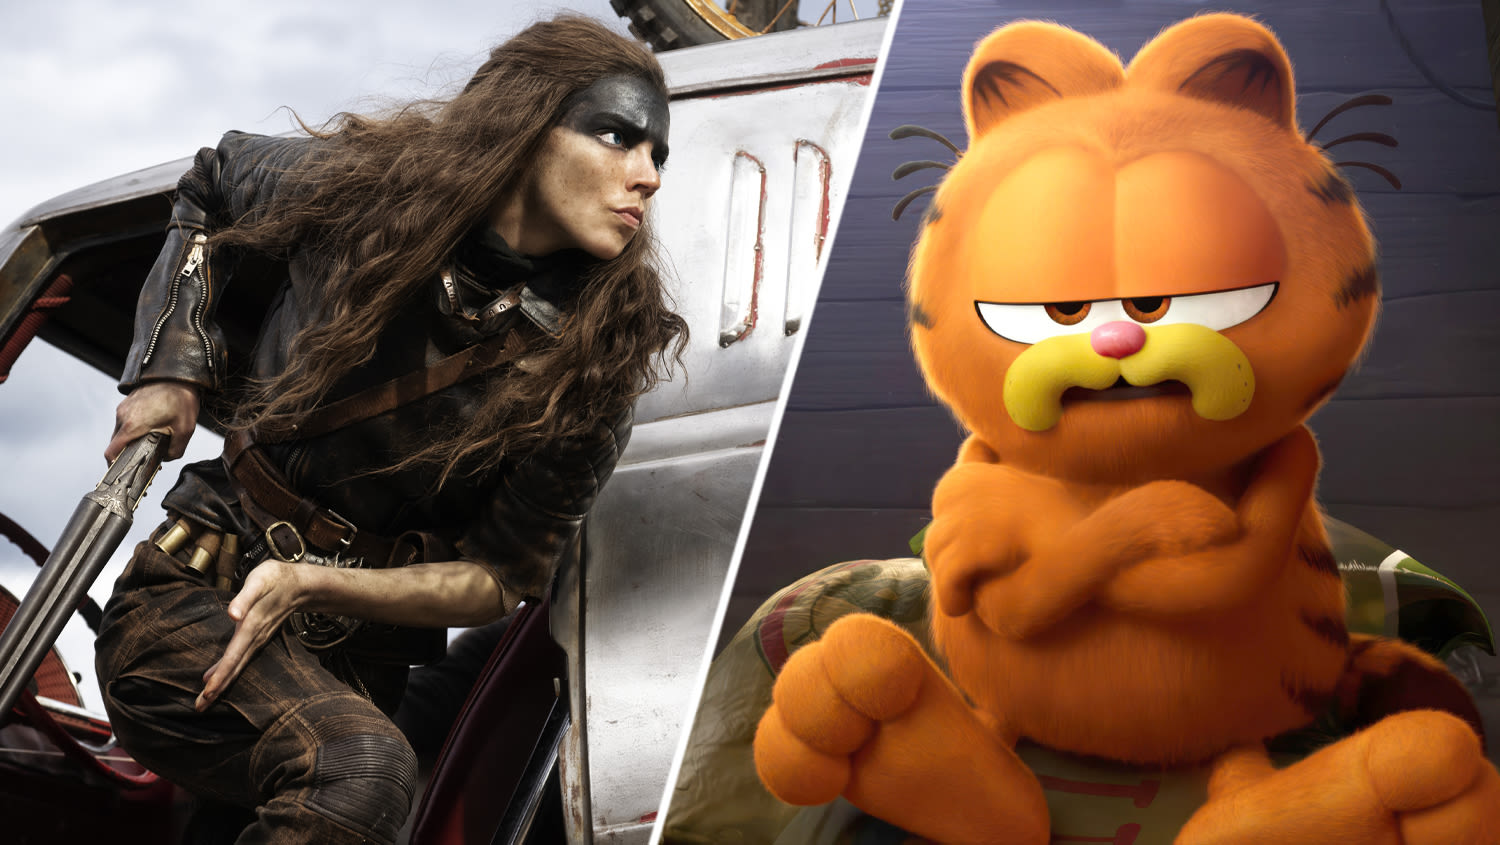 .... 1 Memorial Day Weekend Debut In Decades; ‘The Garfield Movie’ Clawing At $30M-$32M – Friday PM Update